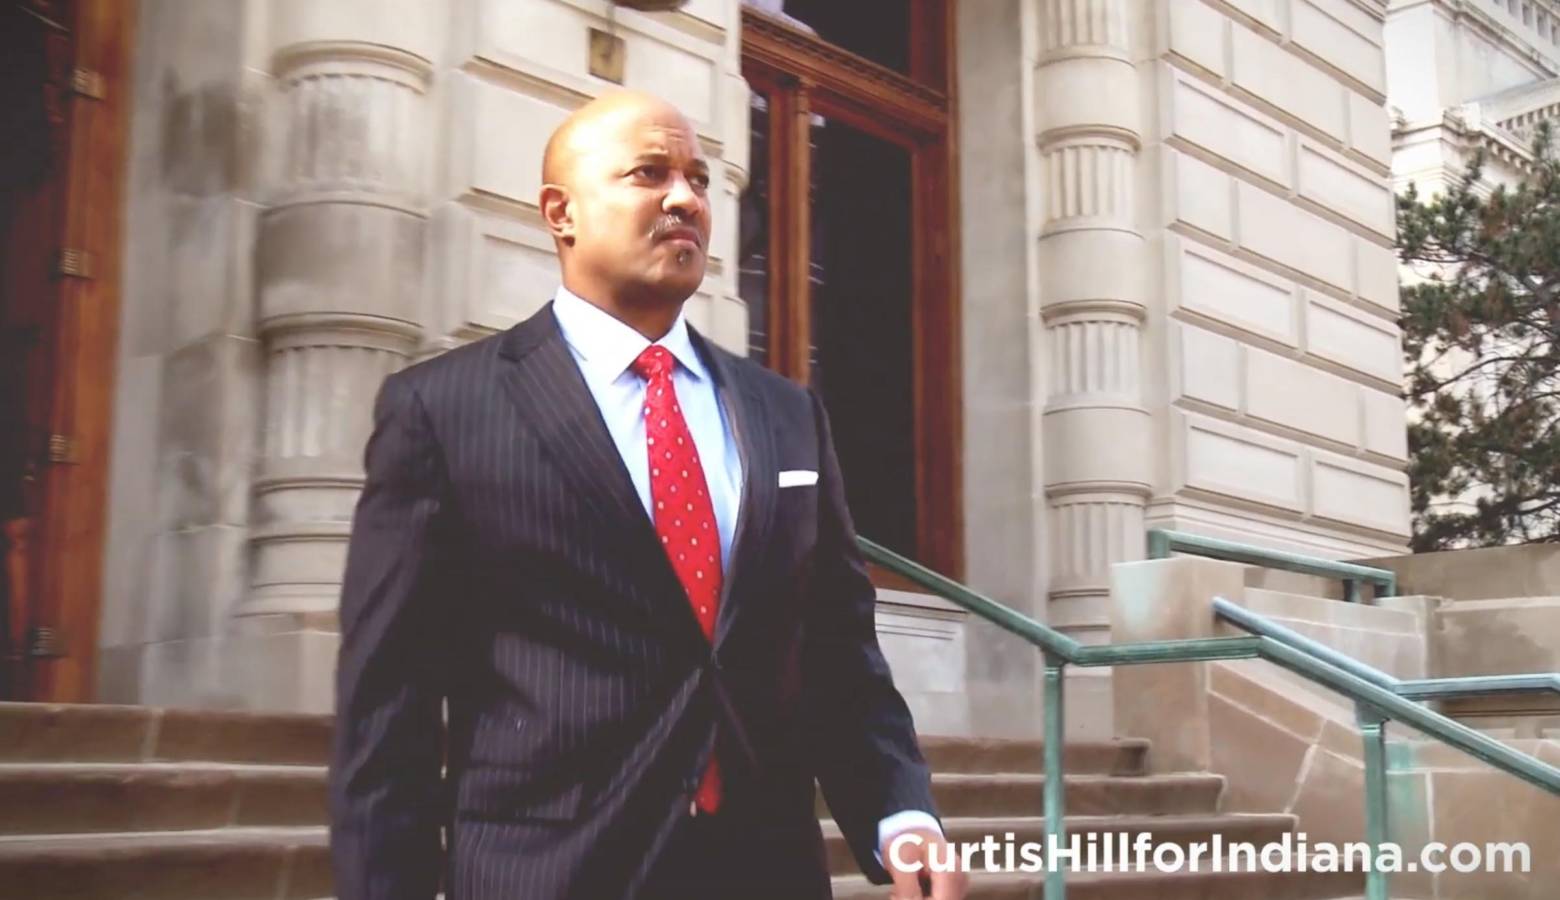 Attorney General Curtis Hill announced his re-election bid via a campaign video. (Curtis Hill for Indiana/Youtube)